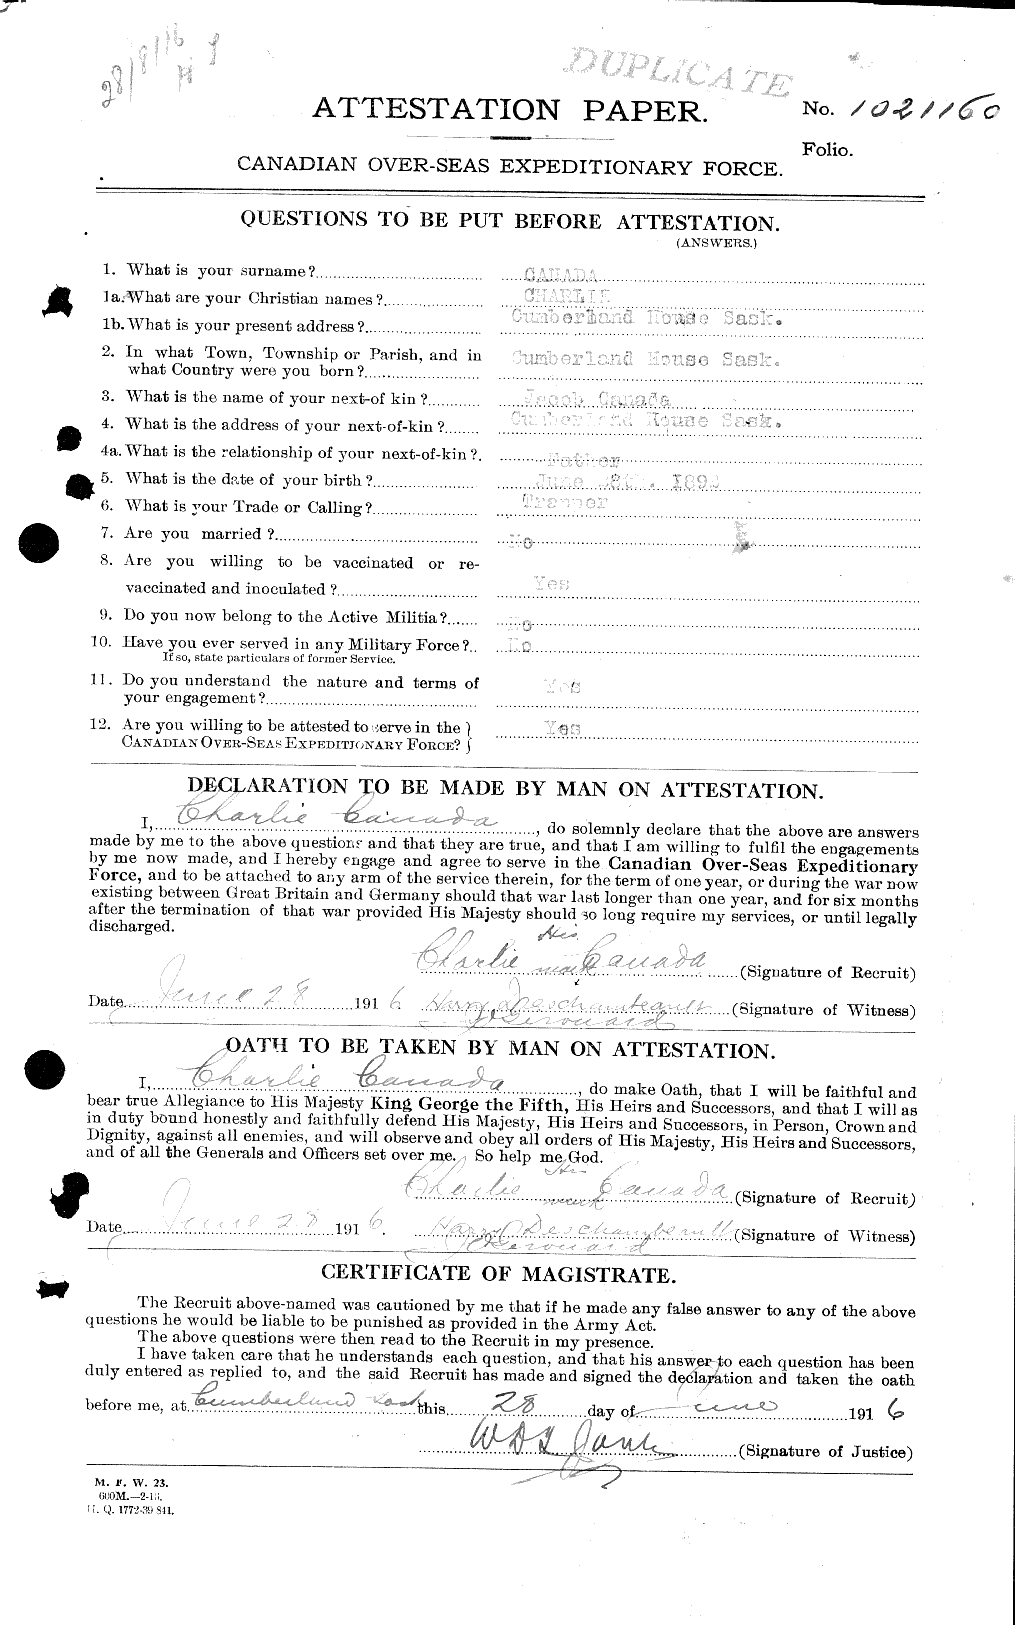 Personnel Records of the First World War - CEF 008838a